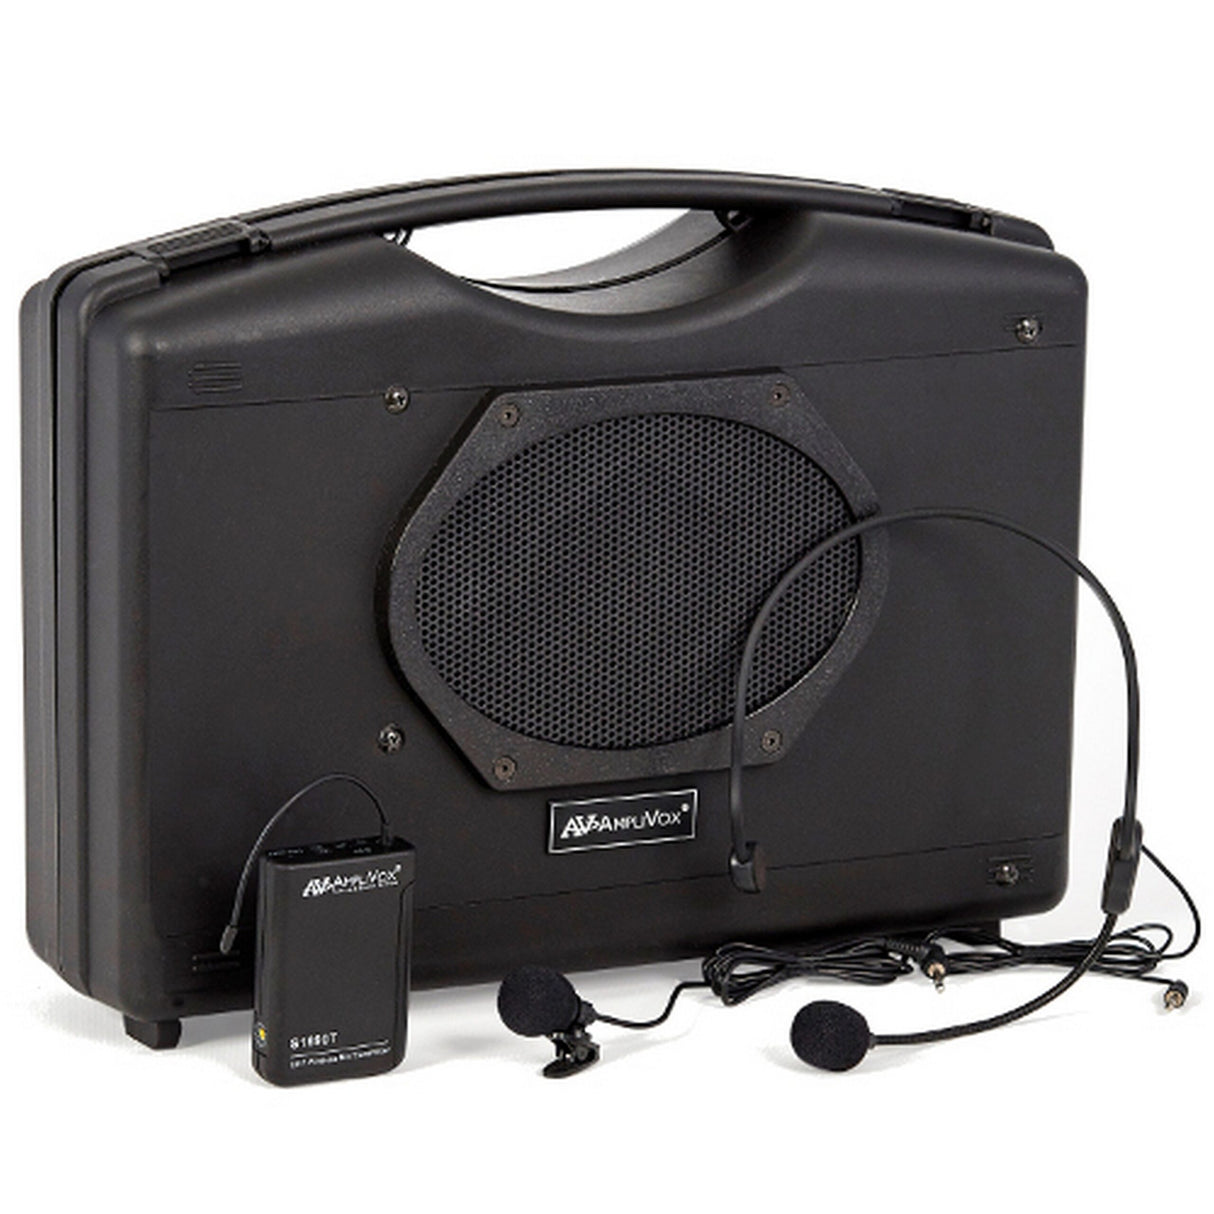 AmpliVox SW222A Wireless Audio Portable Buddy with Headset and Lapel Microphones